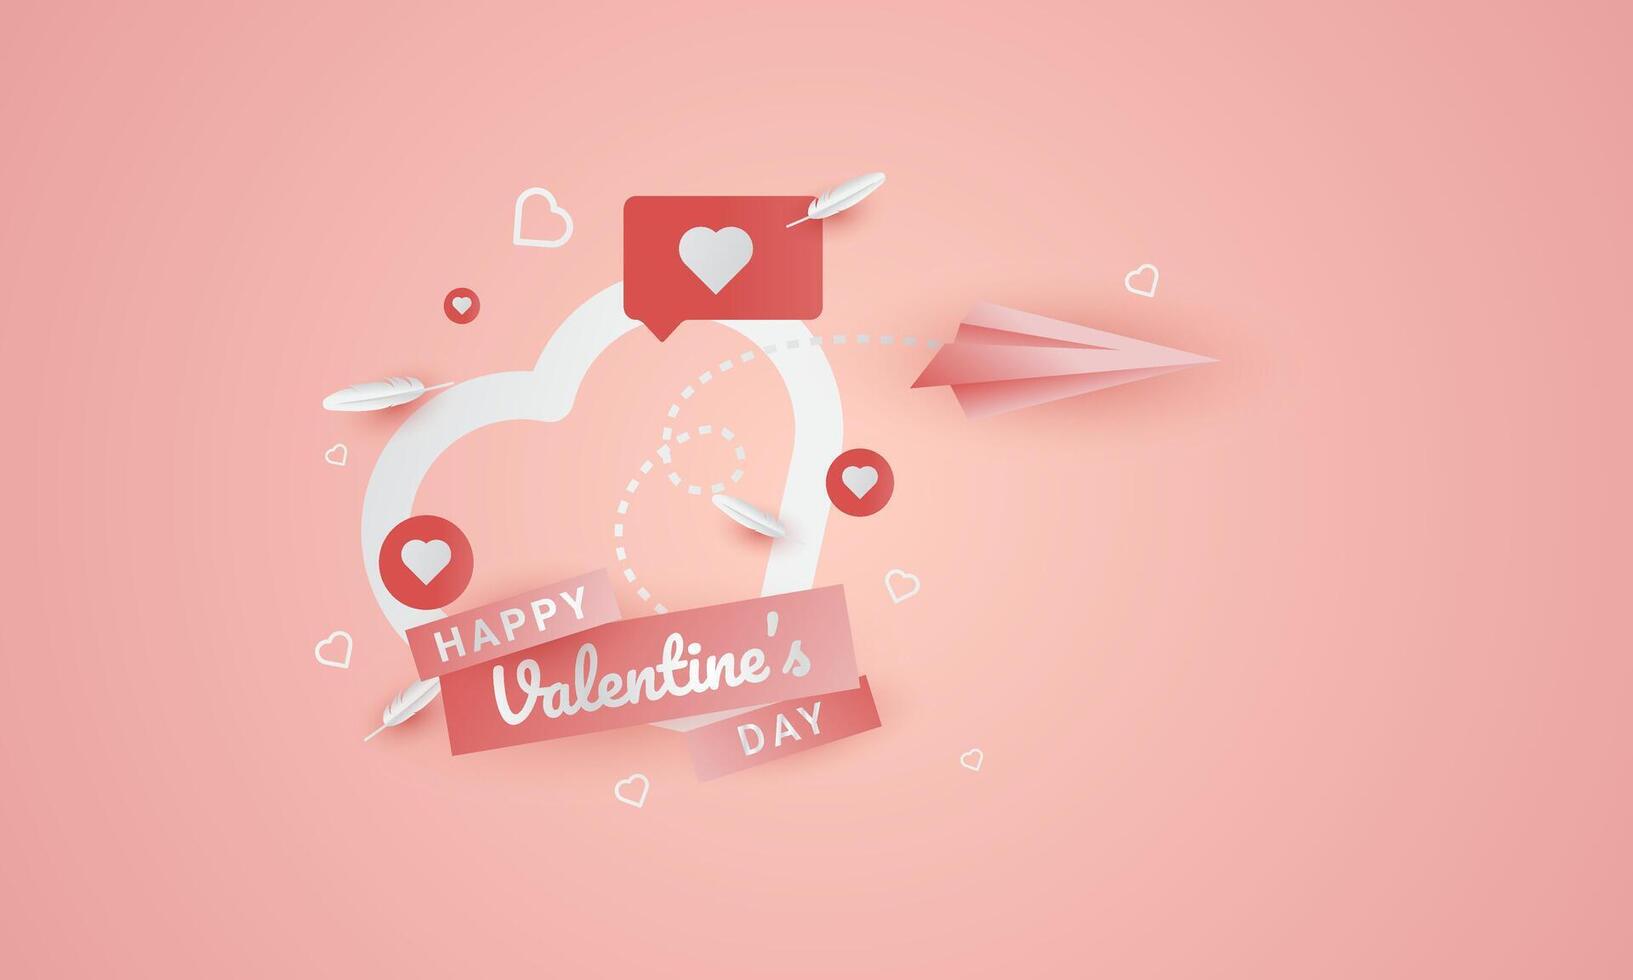 Happy Valentine's Day greeting background, suitable for backgrounds, wallpapers, covers, social media posts, covers and more vector